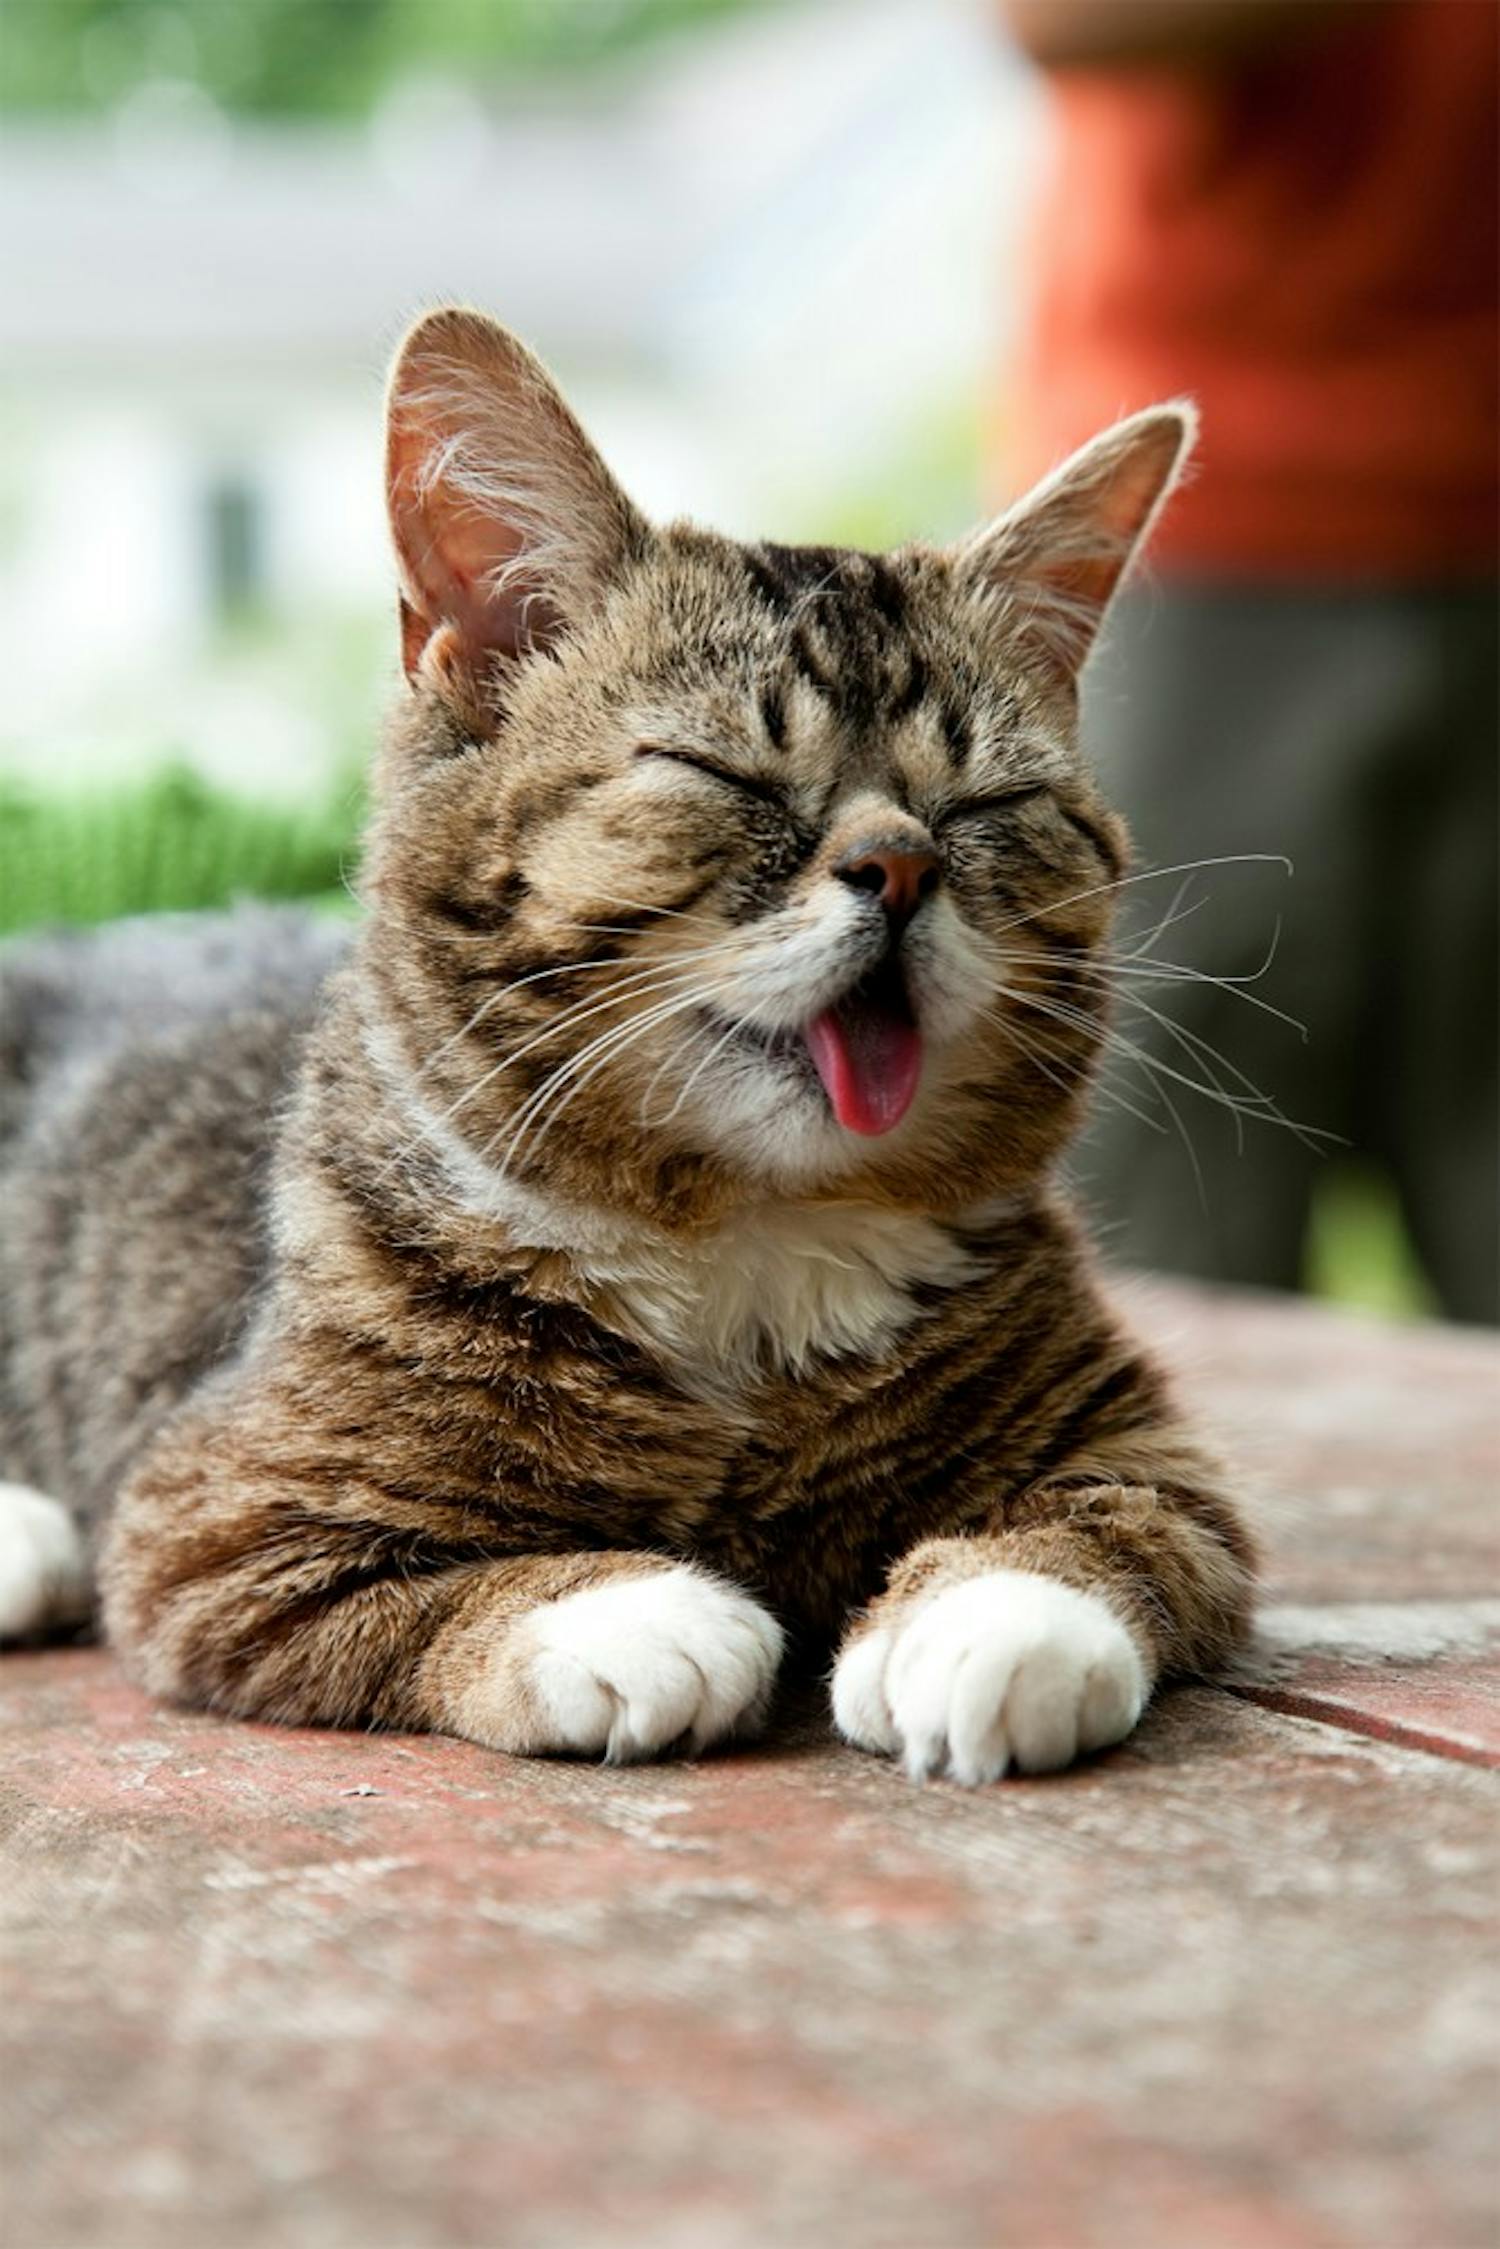 Lil' Bub is a celebrity cat who gained popularity due to her odd appearance.  The cat and her owner, Mike Bridavsky, both reside in Bloomington.